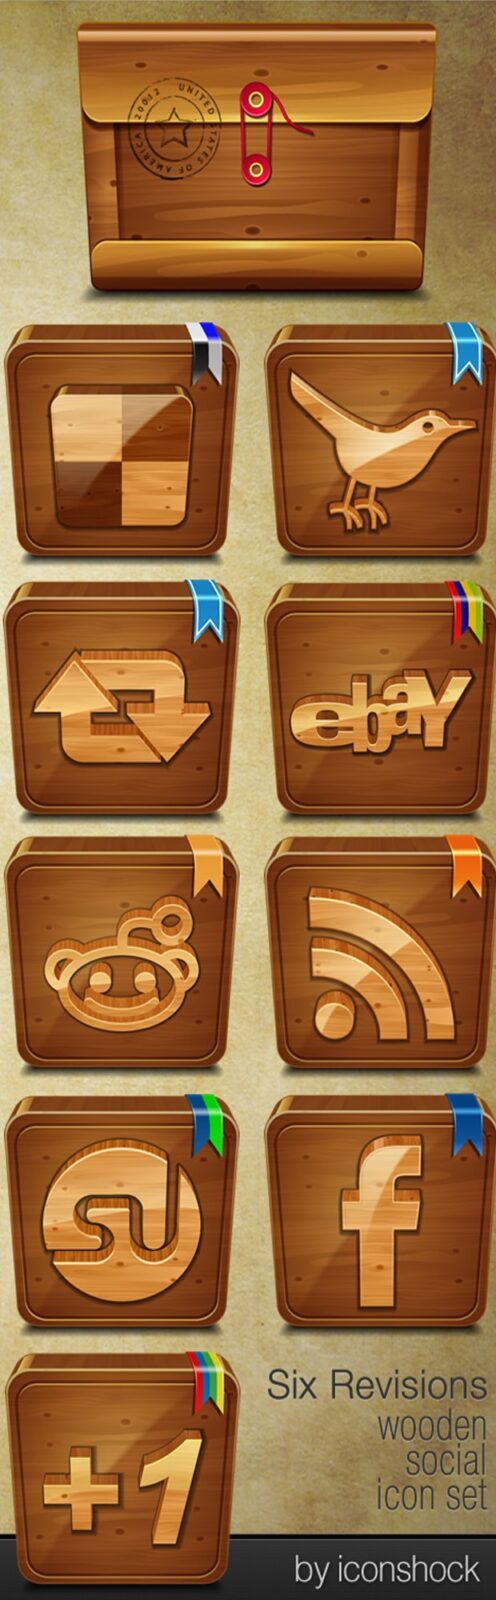 woodface large vectorgab - Wooden Social Media Awesome Vectors